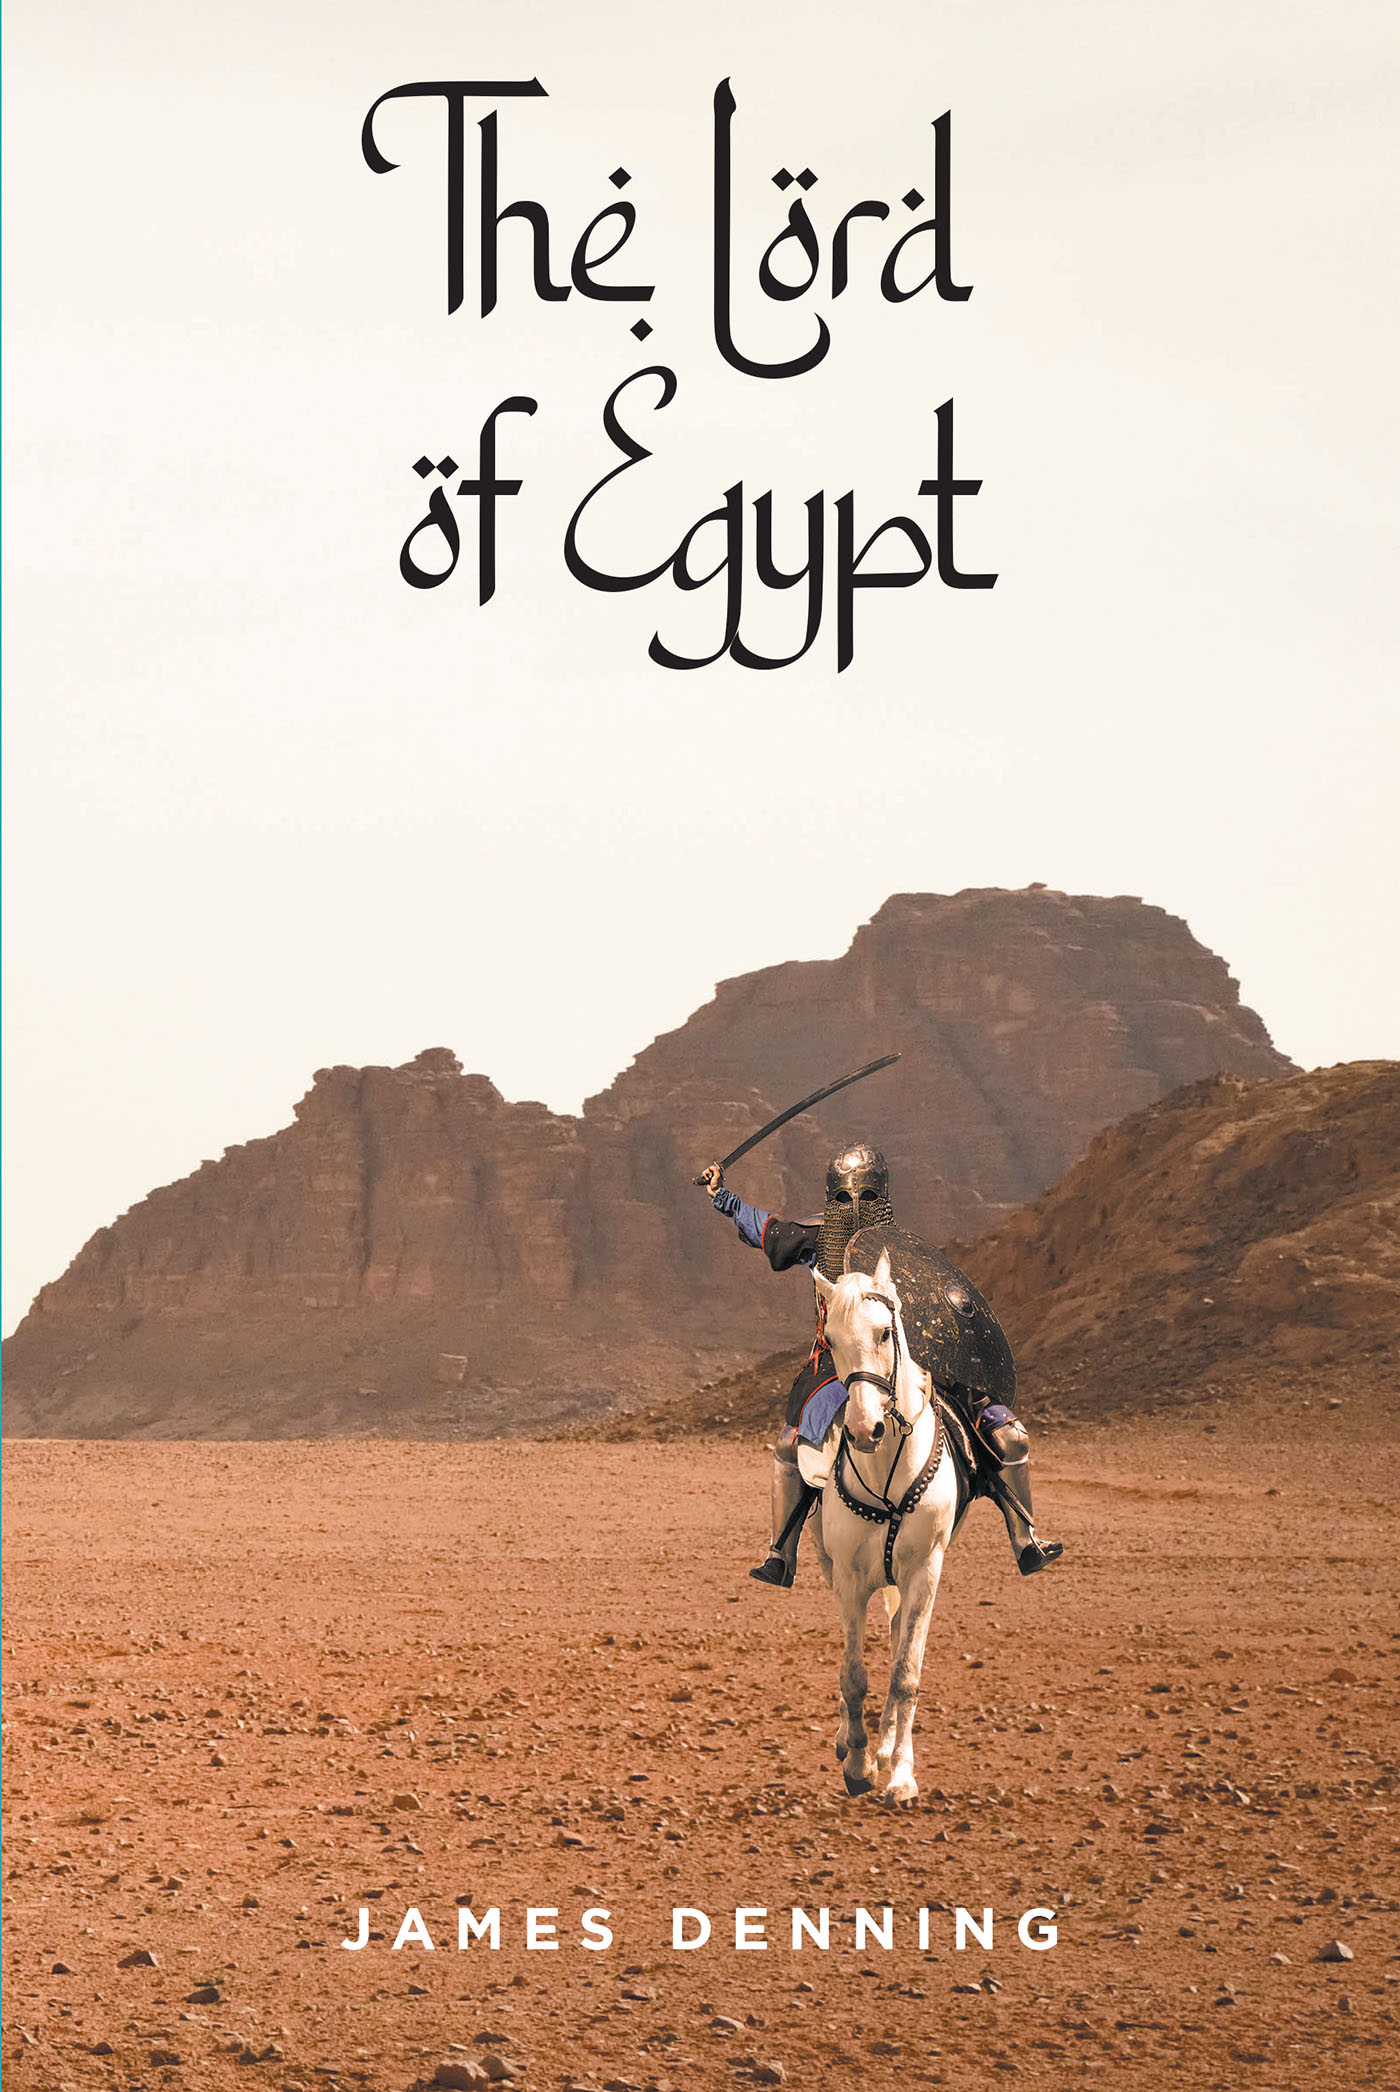 James Denning’s Newly Released "The Lord of Egypt" is a Compelling Story of Unexpected Imbalances of Power and a Shocking Civil War